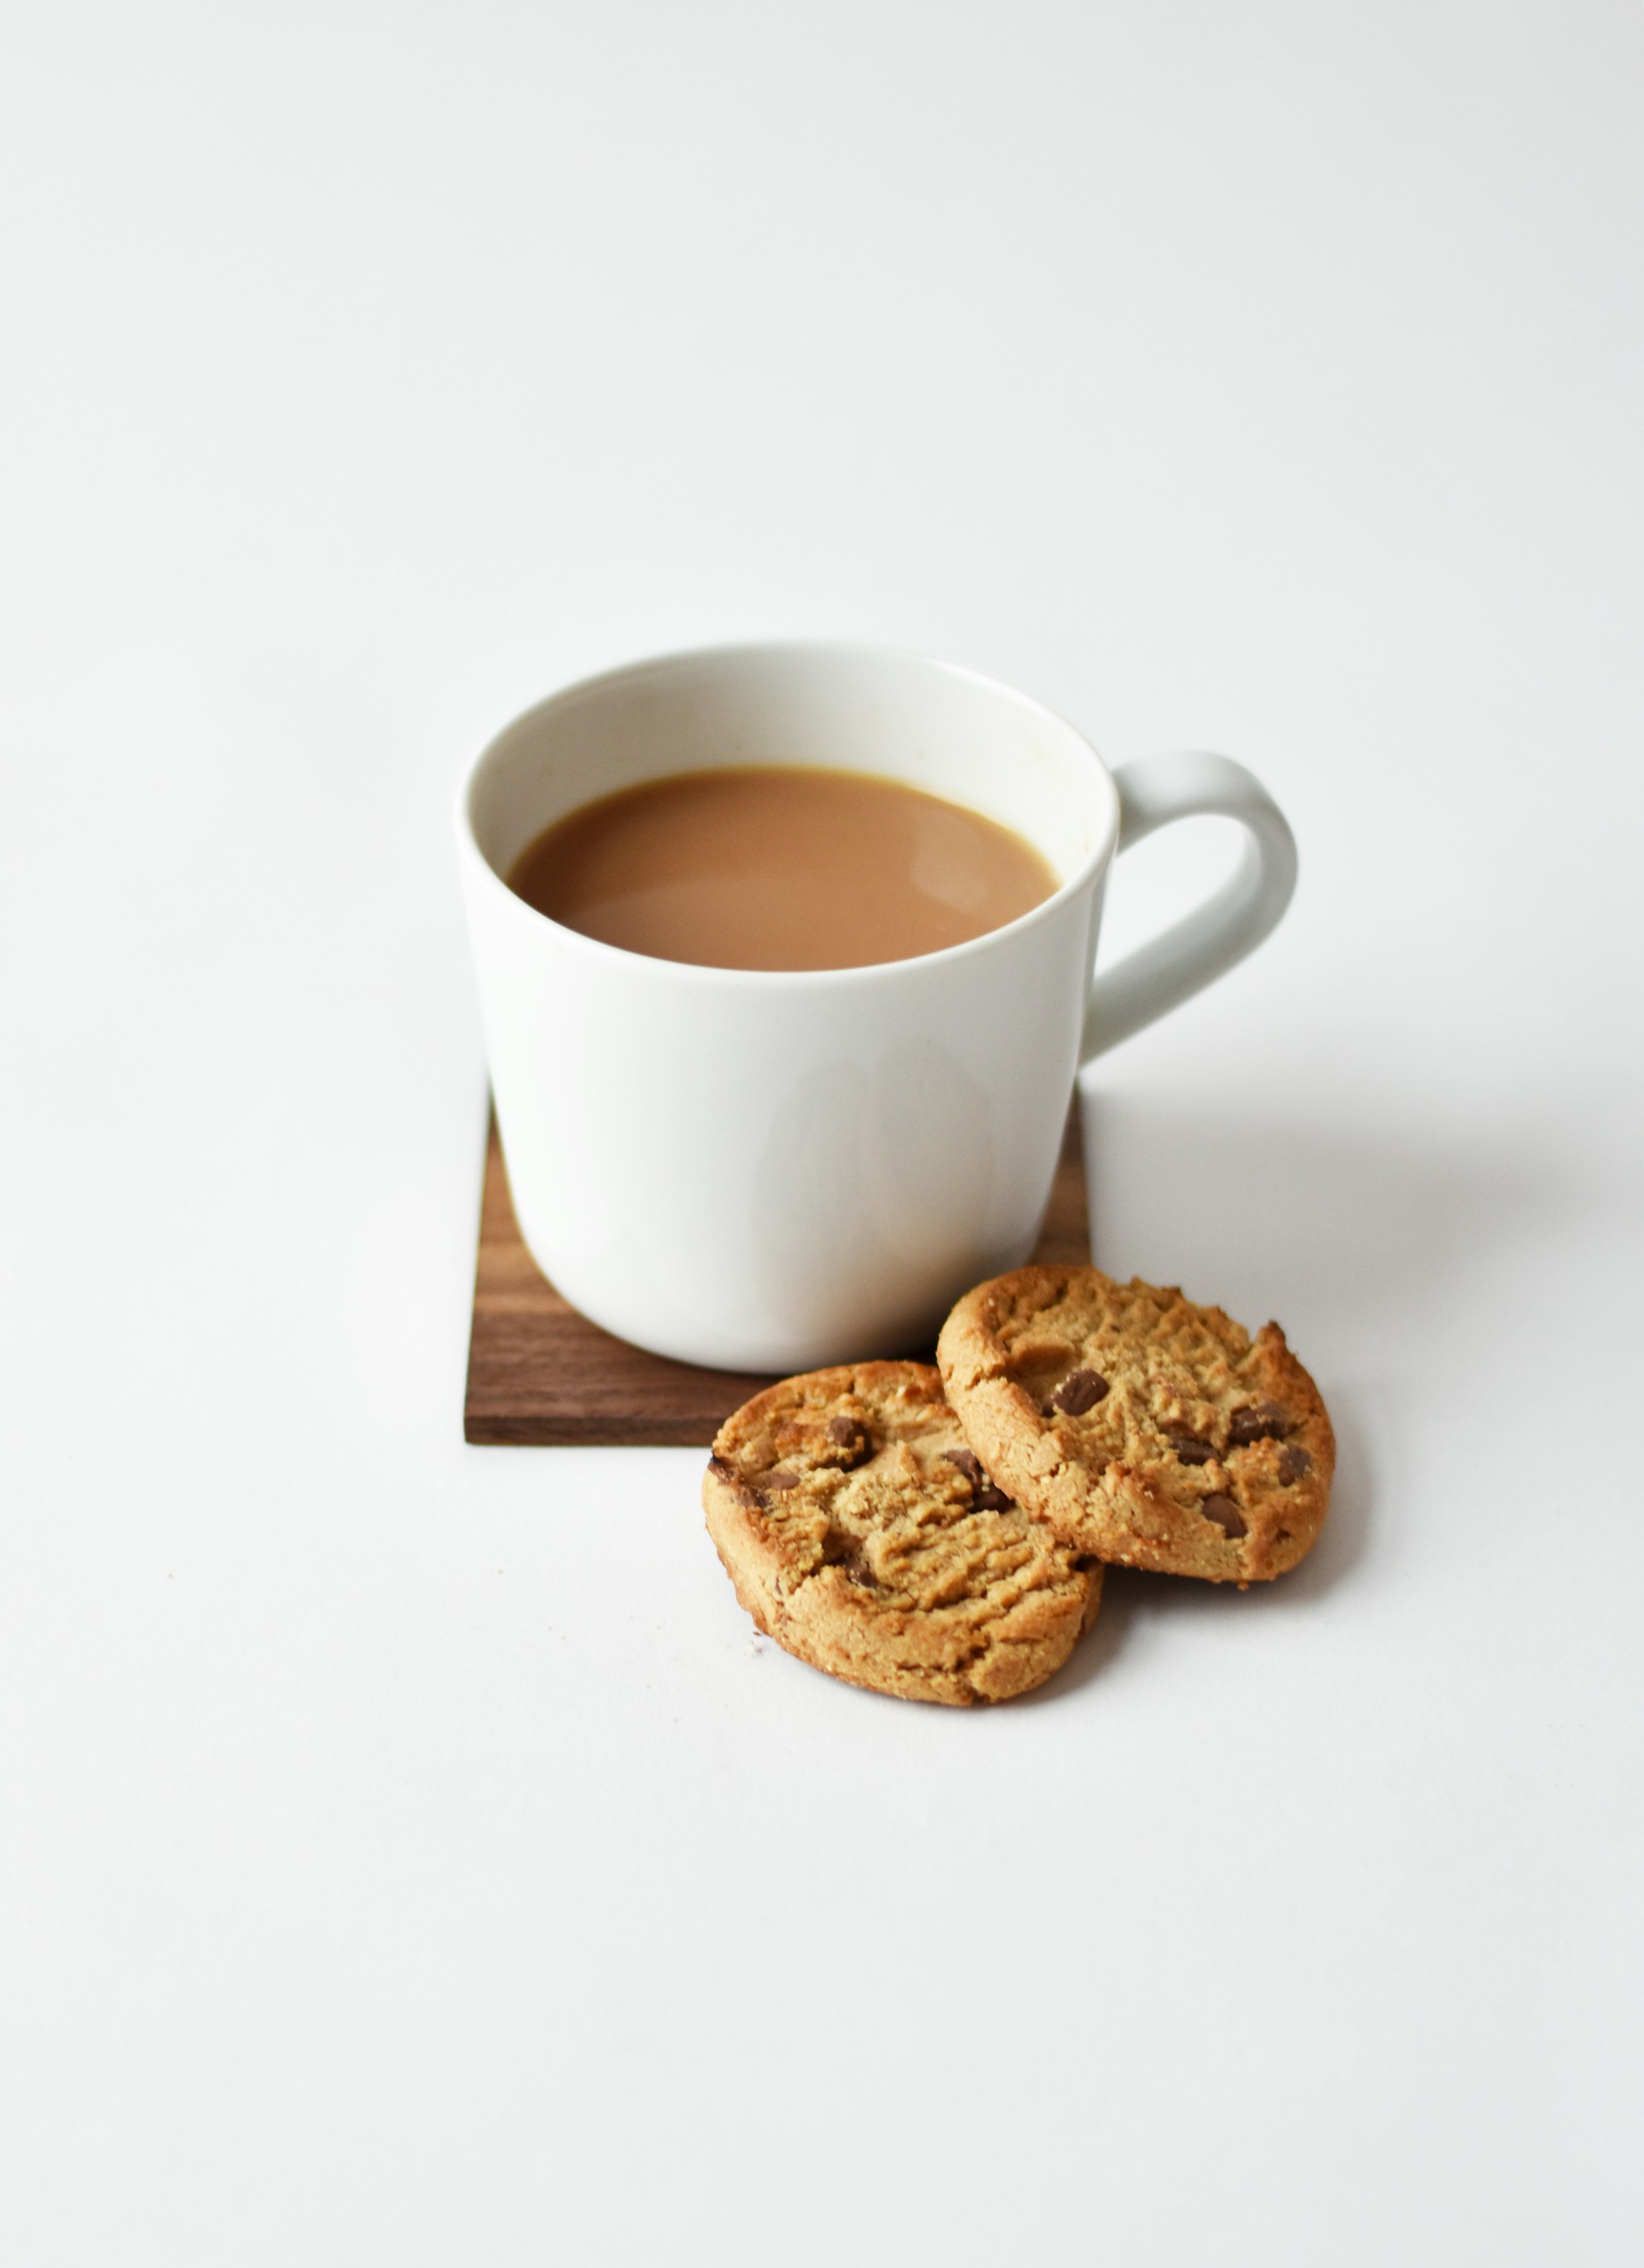 A cup of tea and cookies | Source: Unsplash